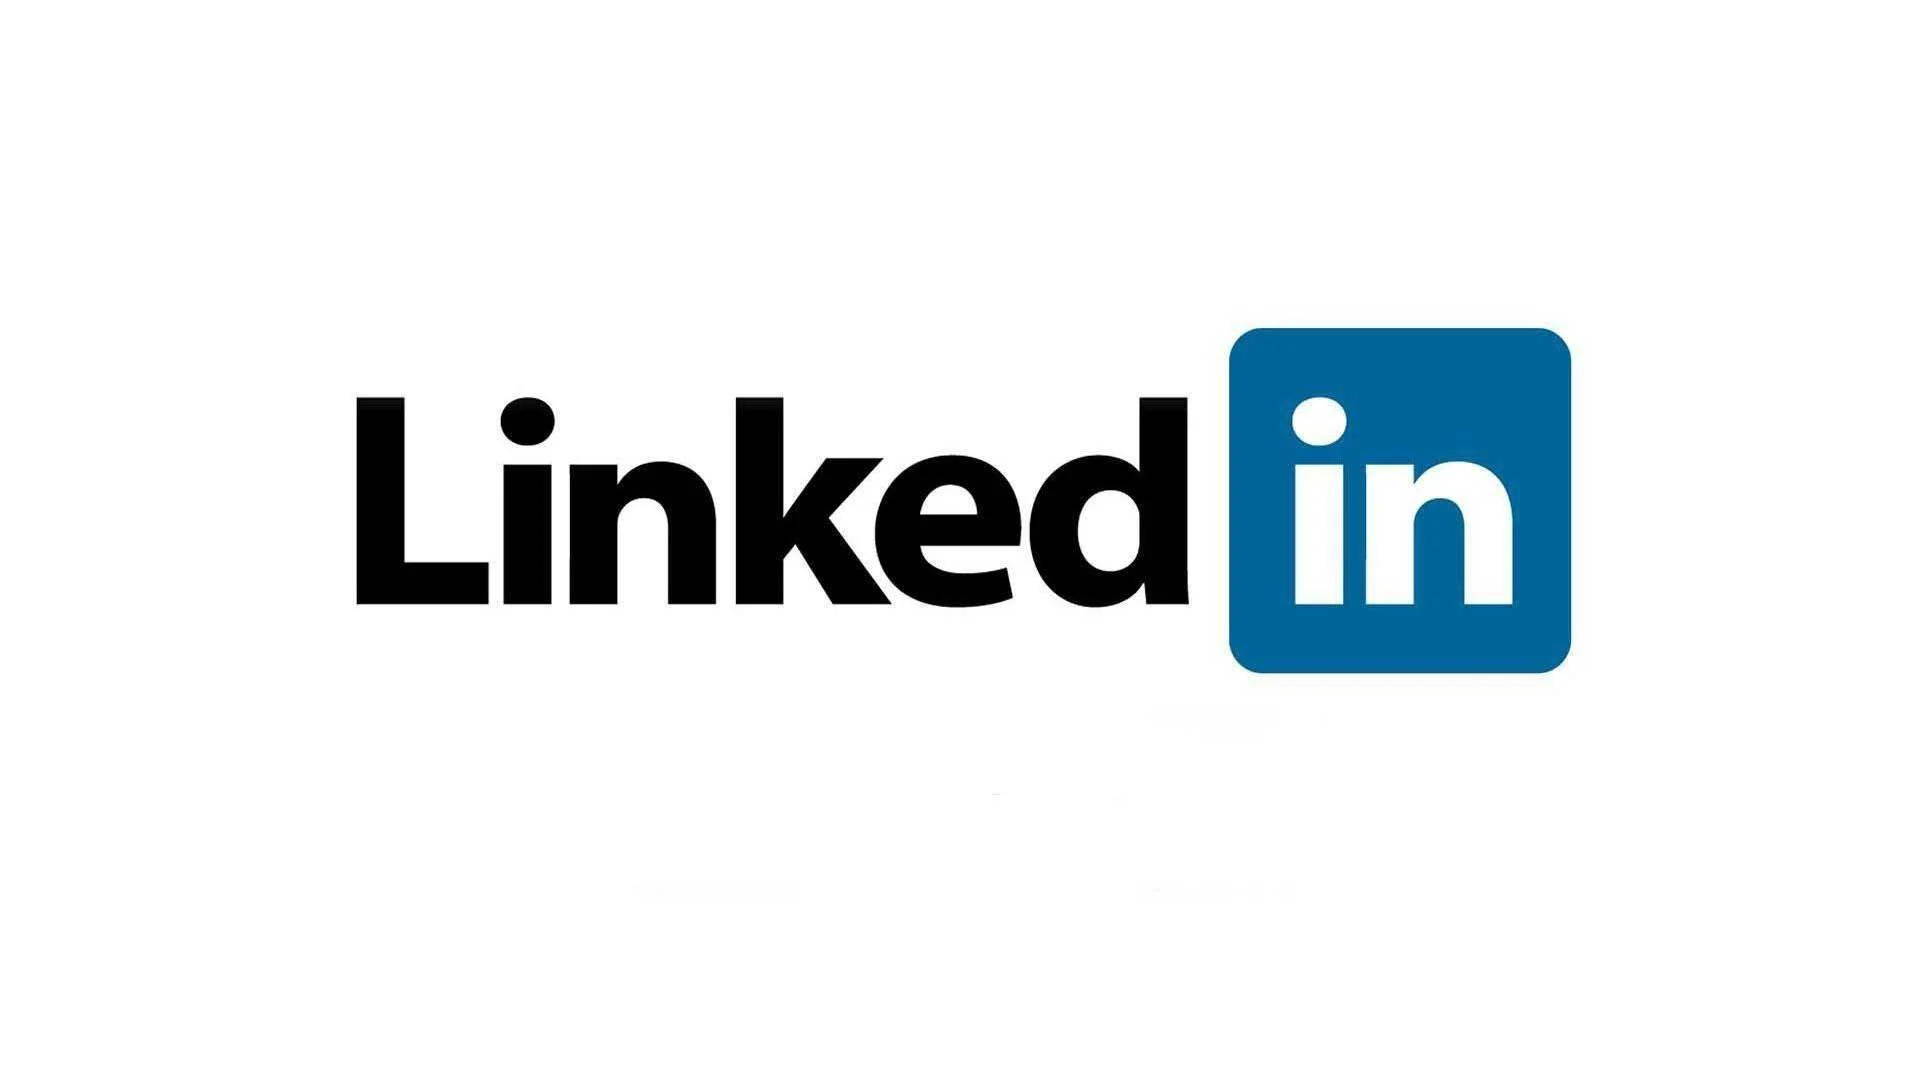 LinkedIn - The most popular social media platforms in the United States